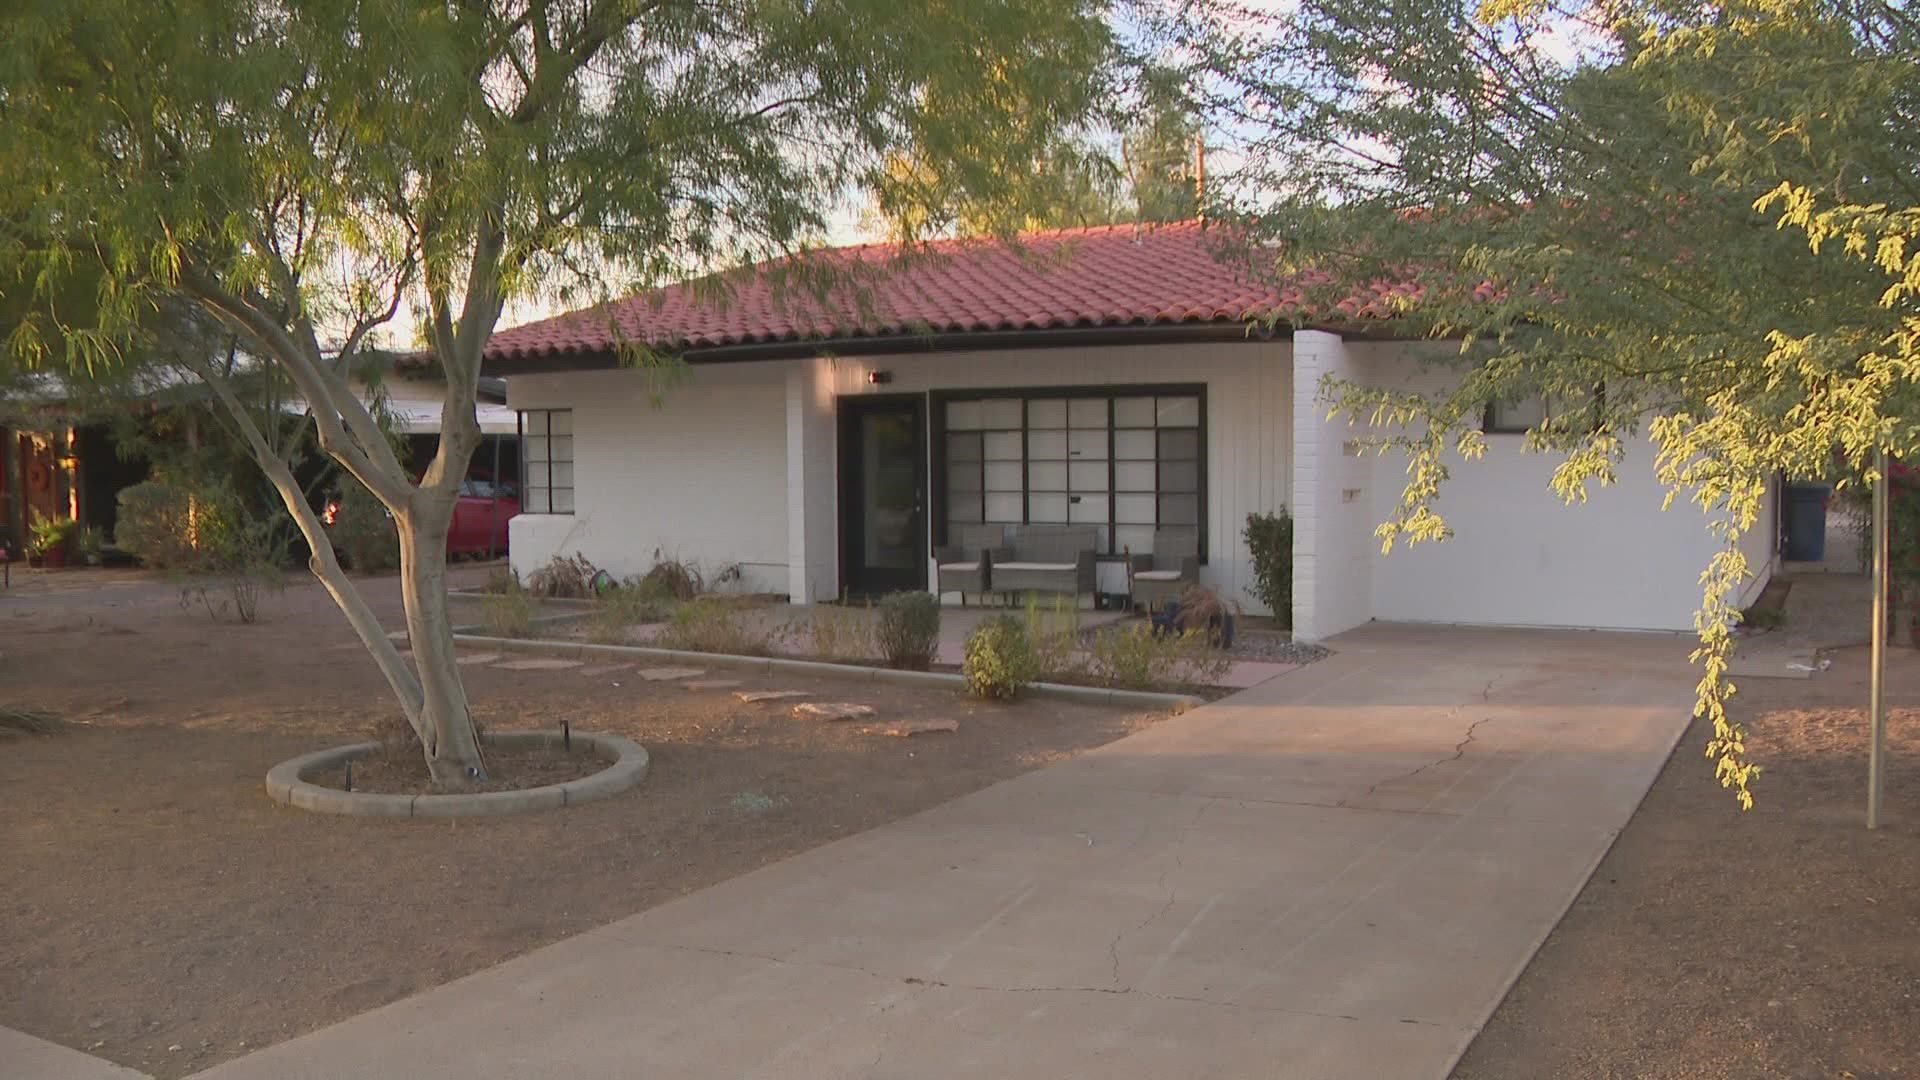 As the rate of shootings at house parties in short-term rentals continues to climb, Valley cities are taking steps to address rental properties.